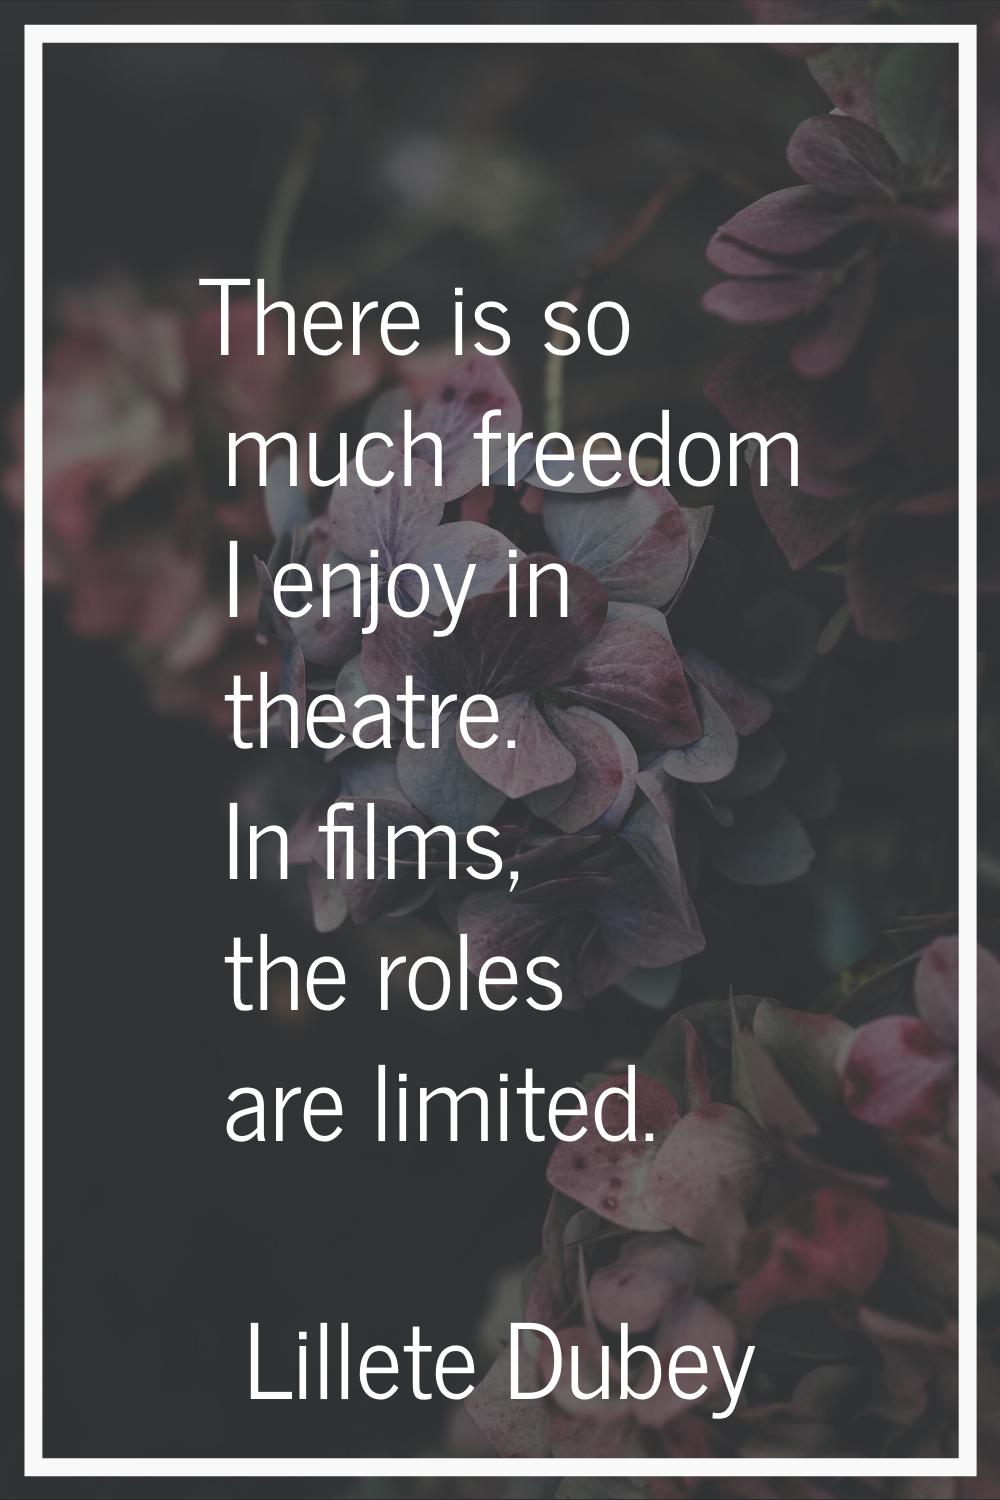 There is so much freedom I enjoy in theatre. In films, the roles are limited.